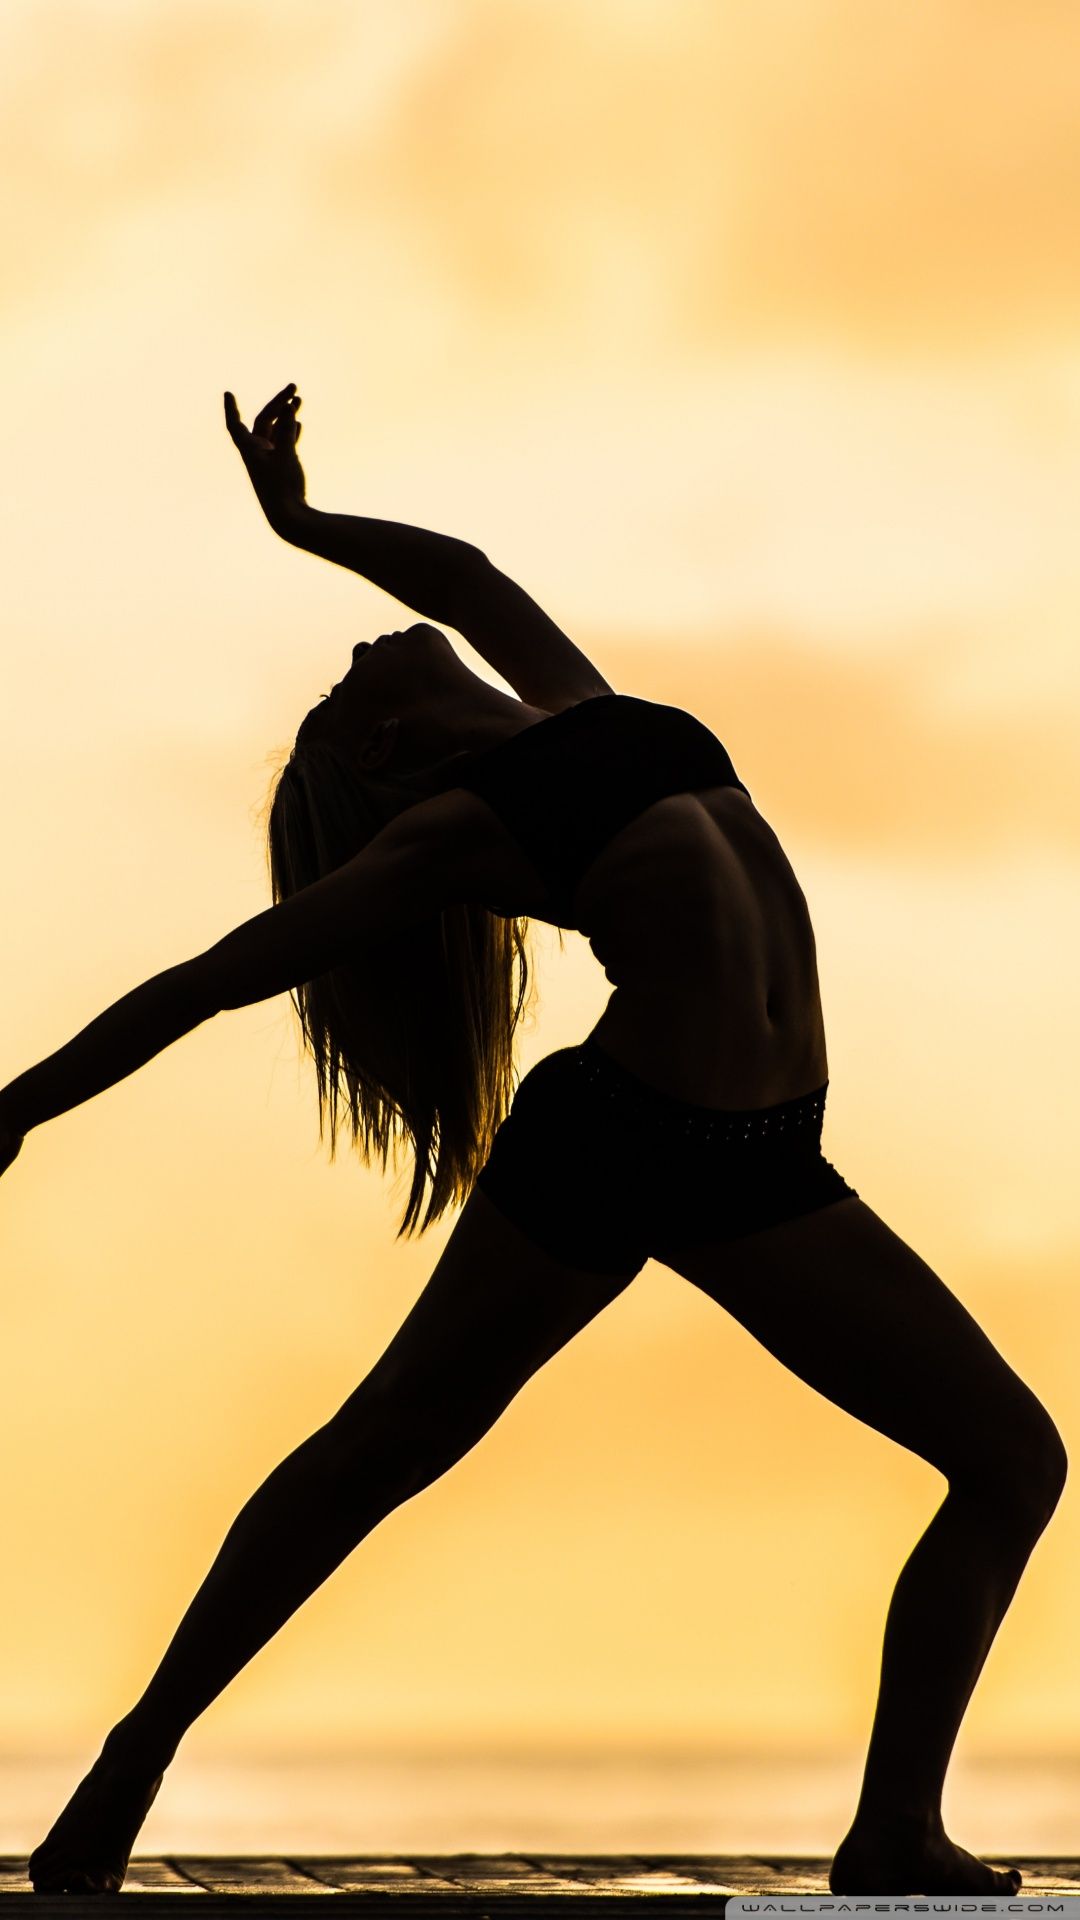 A woman doing yoga in the sunset - Dance